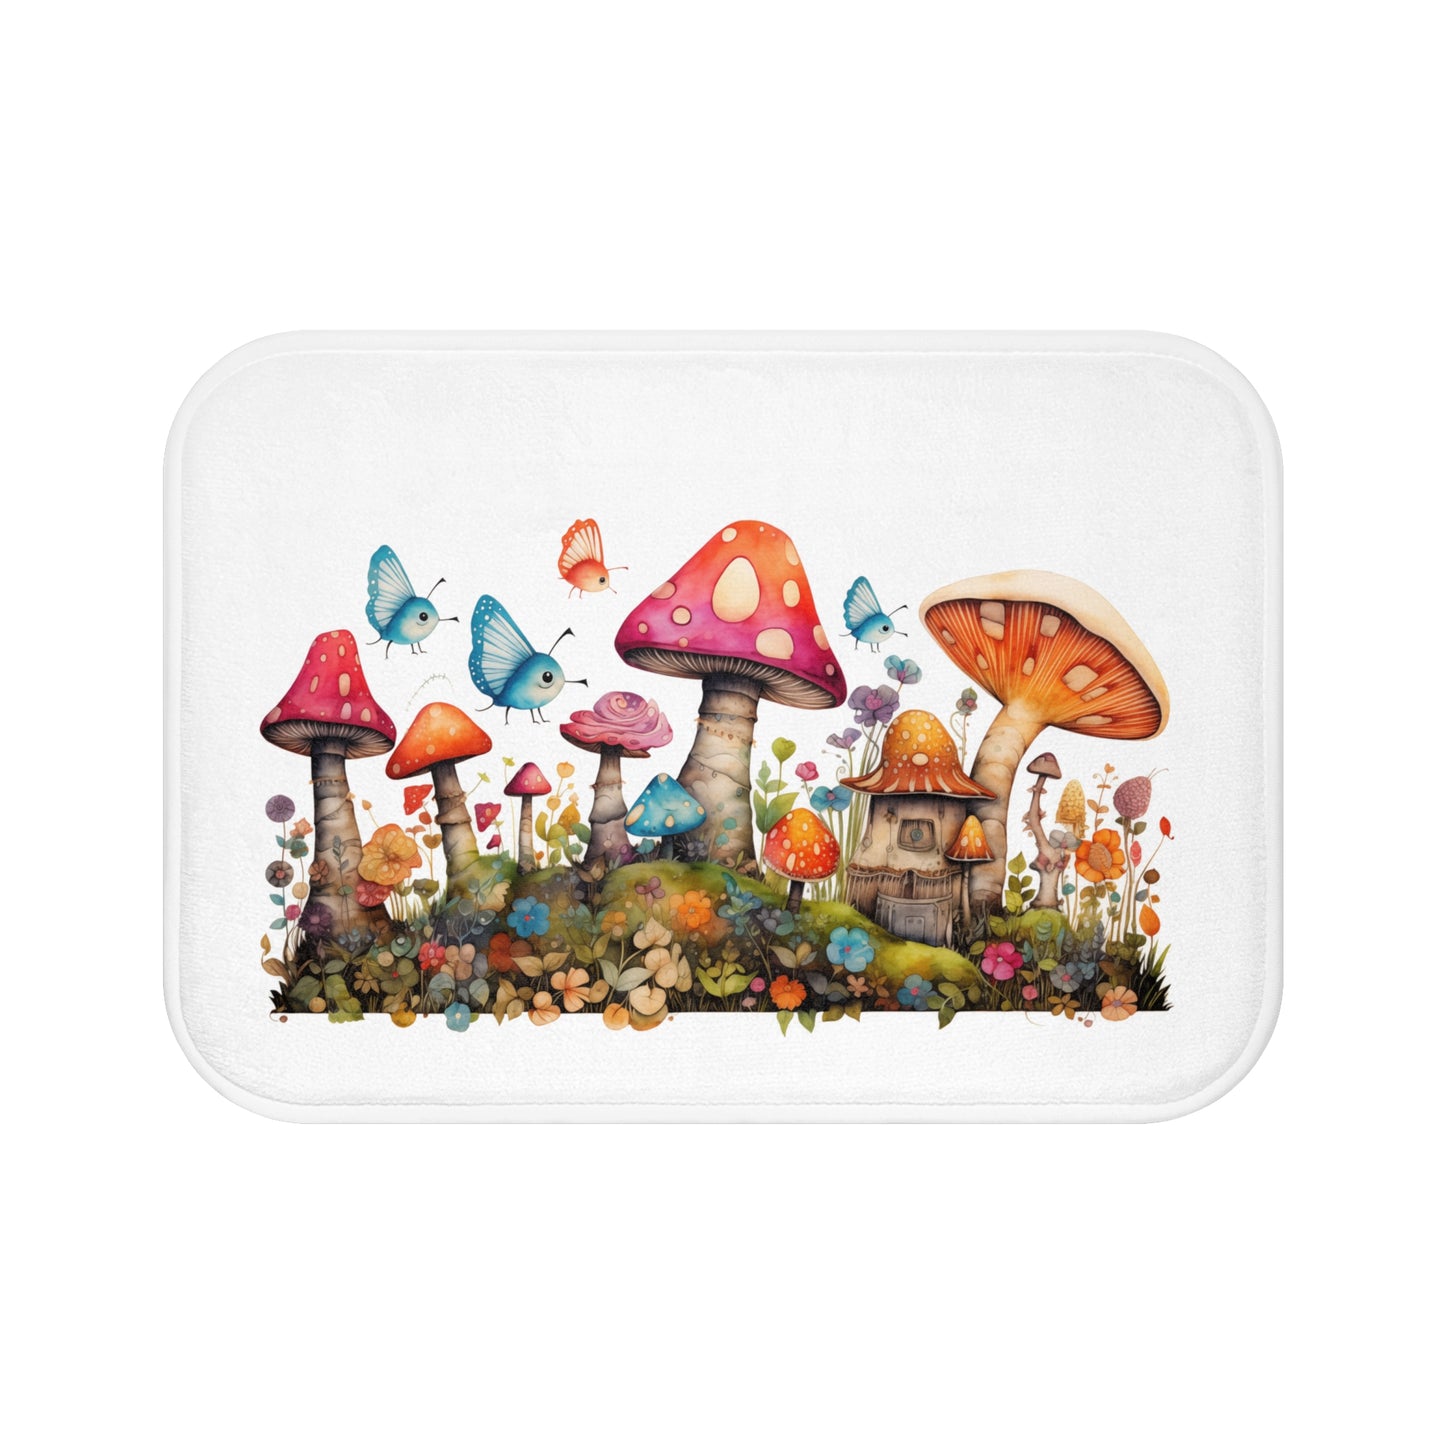 Enchanting Mushroom Cottage Adorned with Butterflies and Toadstools  - Bathroom Non-Slip Mat 2 Sizes